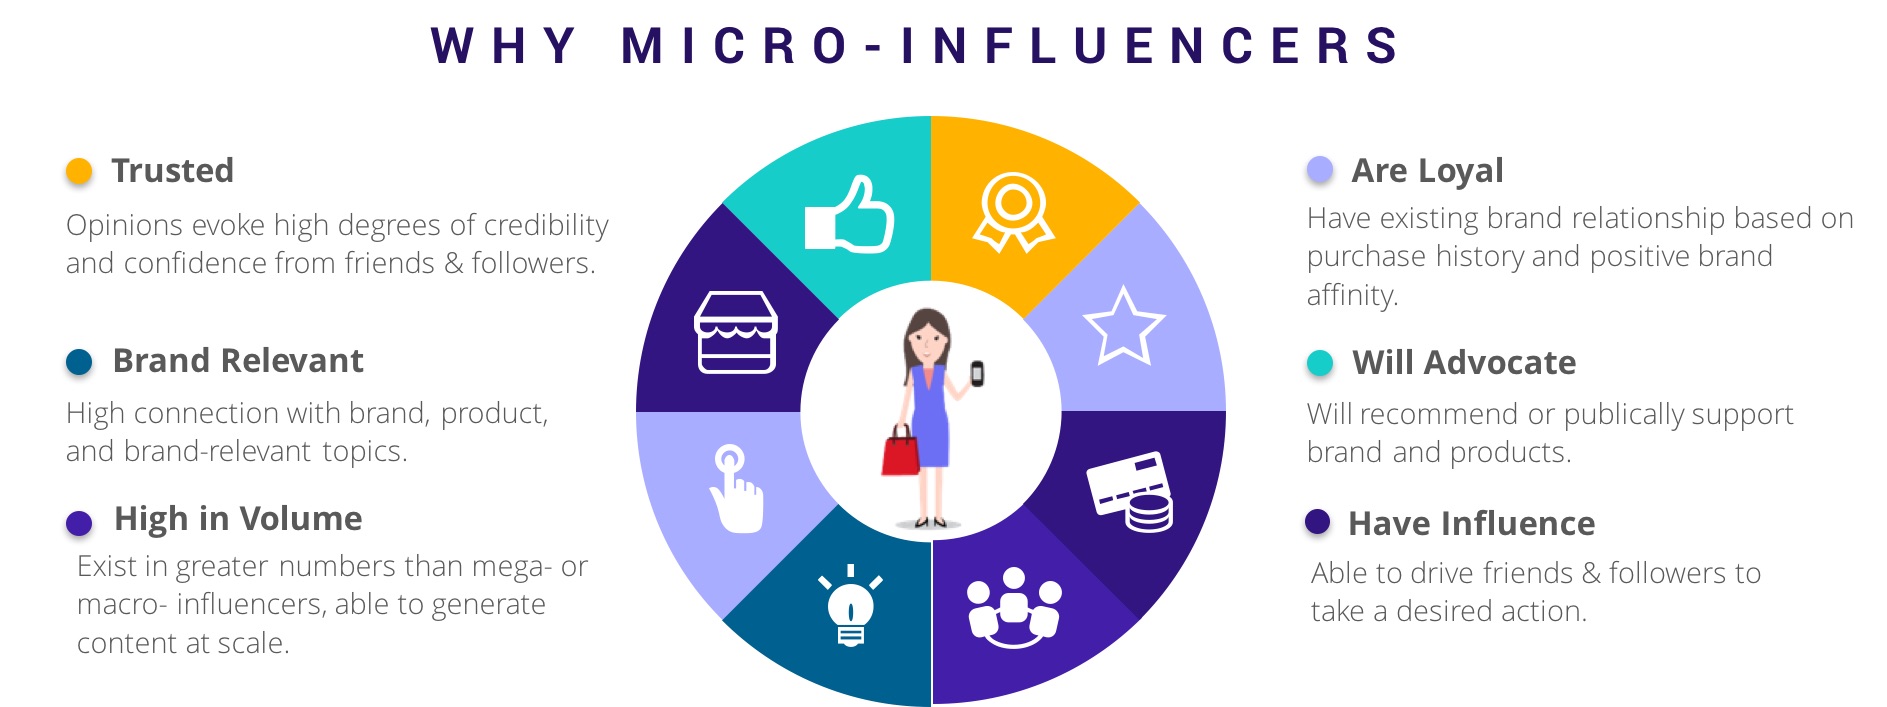 micro influencer, why, marketing